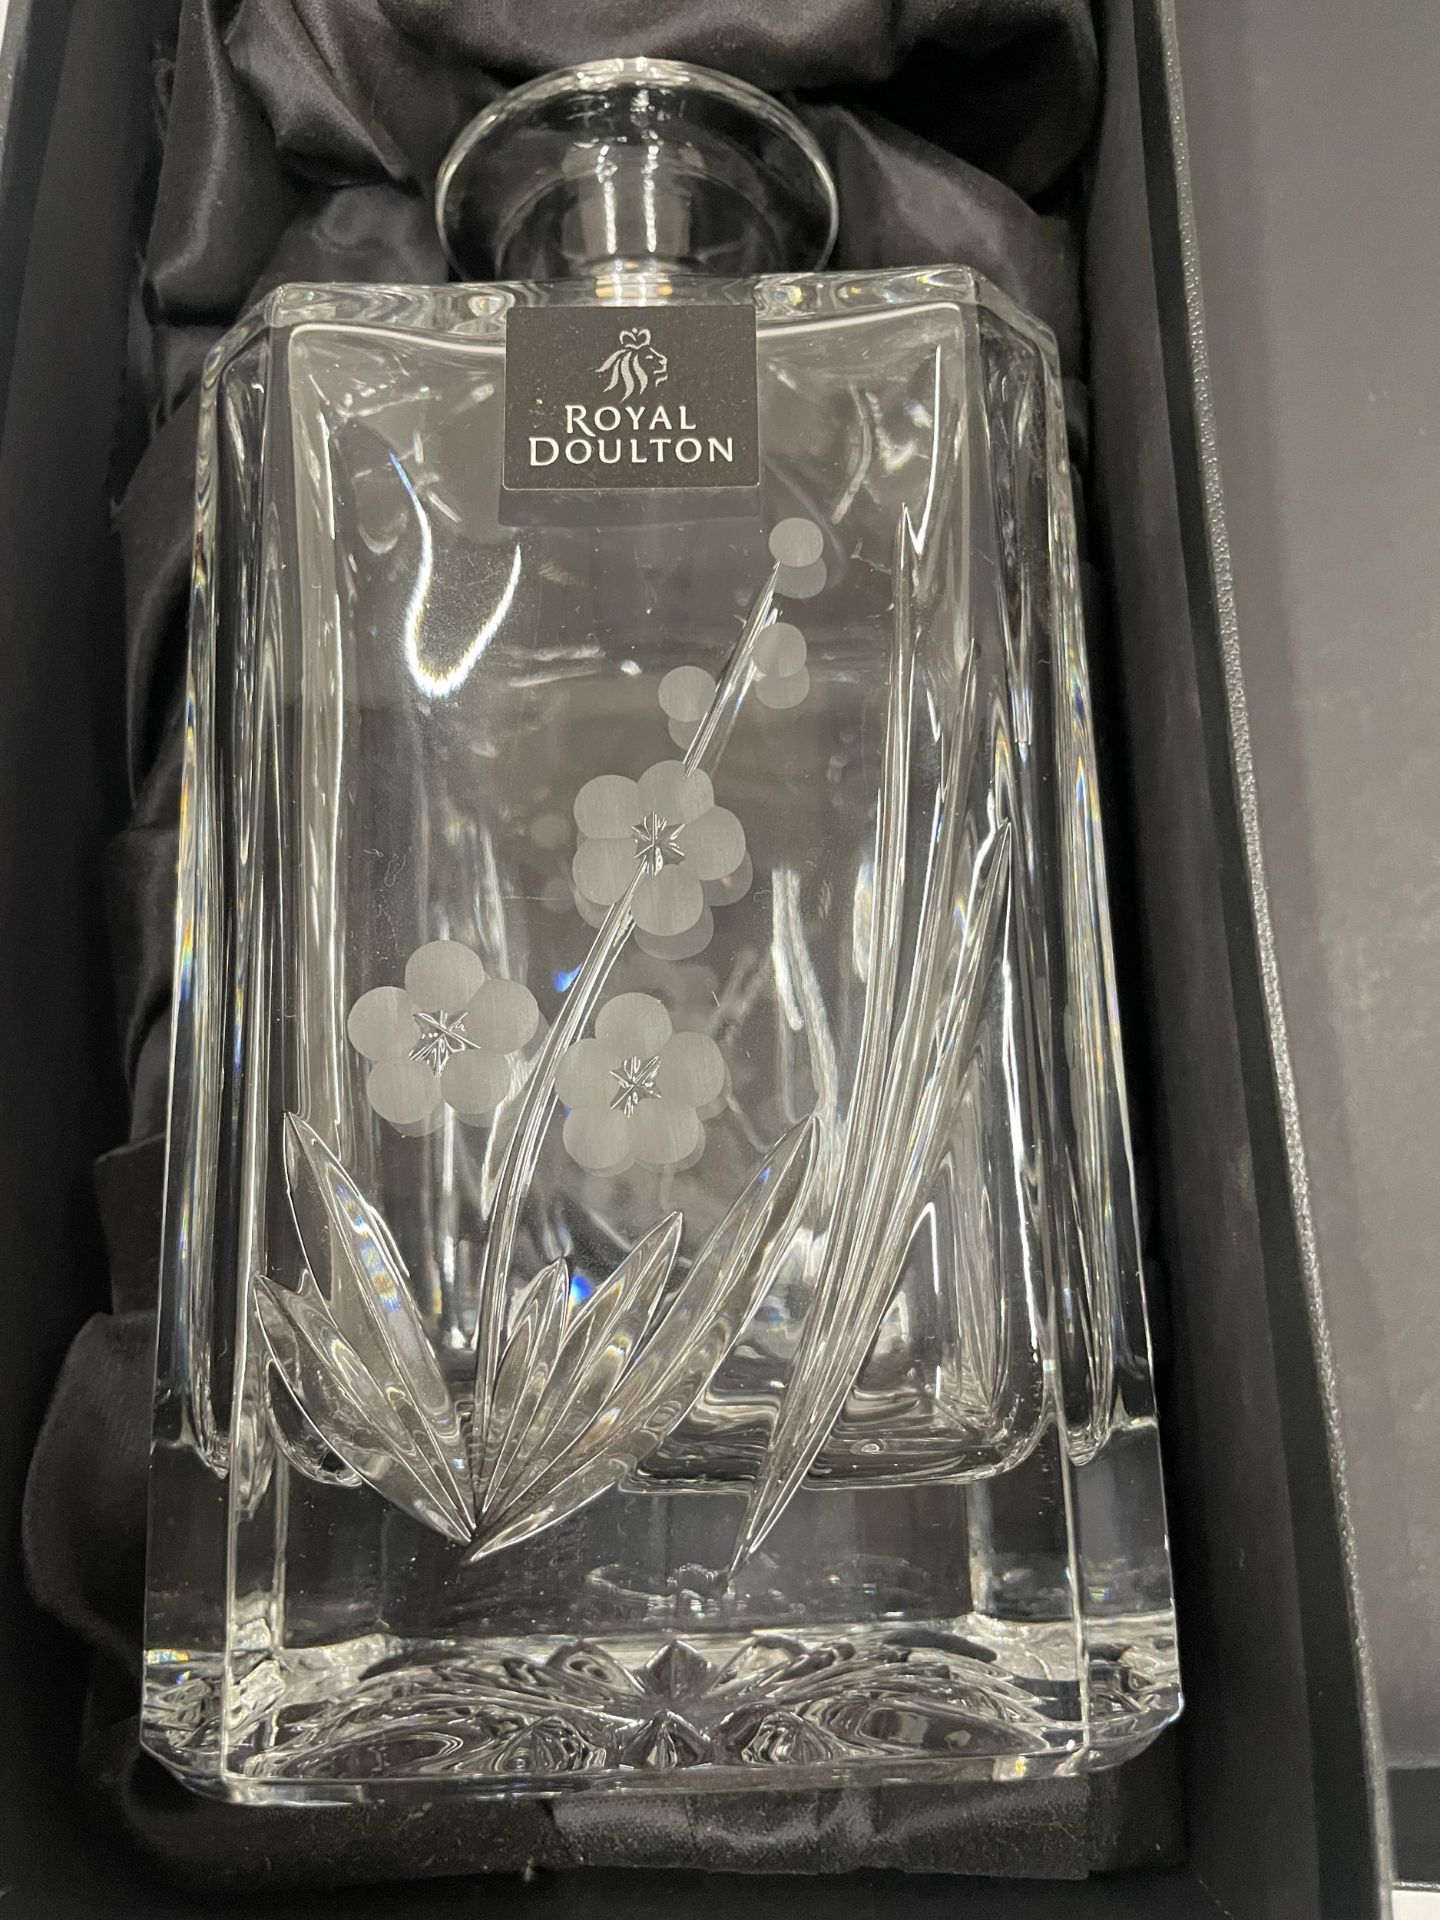 A BOXED ROYAL DOULTON GLASS DECANTER WITH ETCHED FLORAL DESIGN - Image 2 of 4